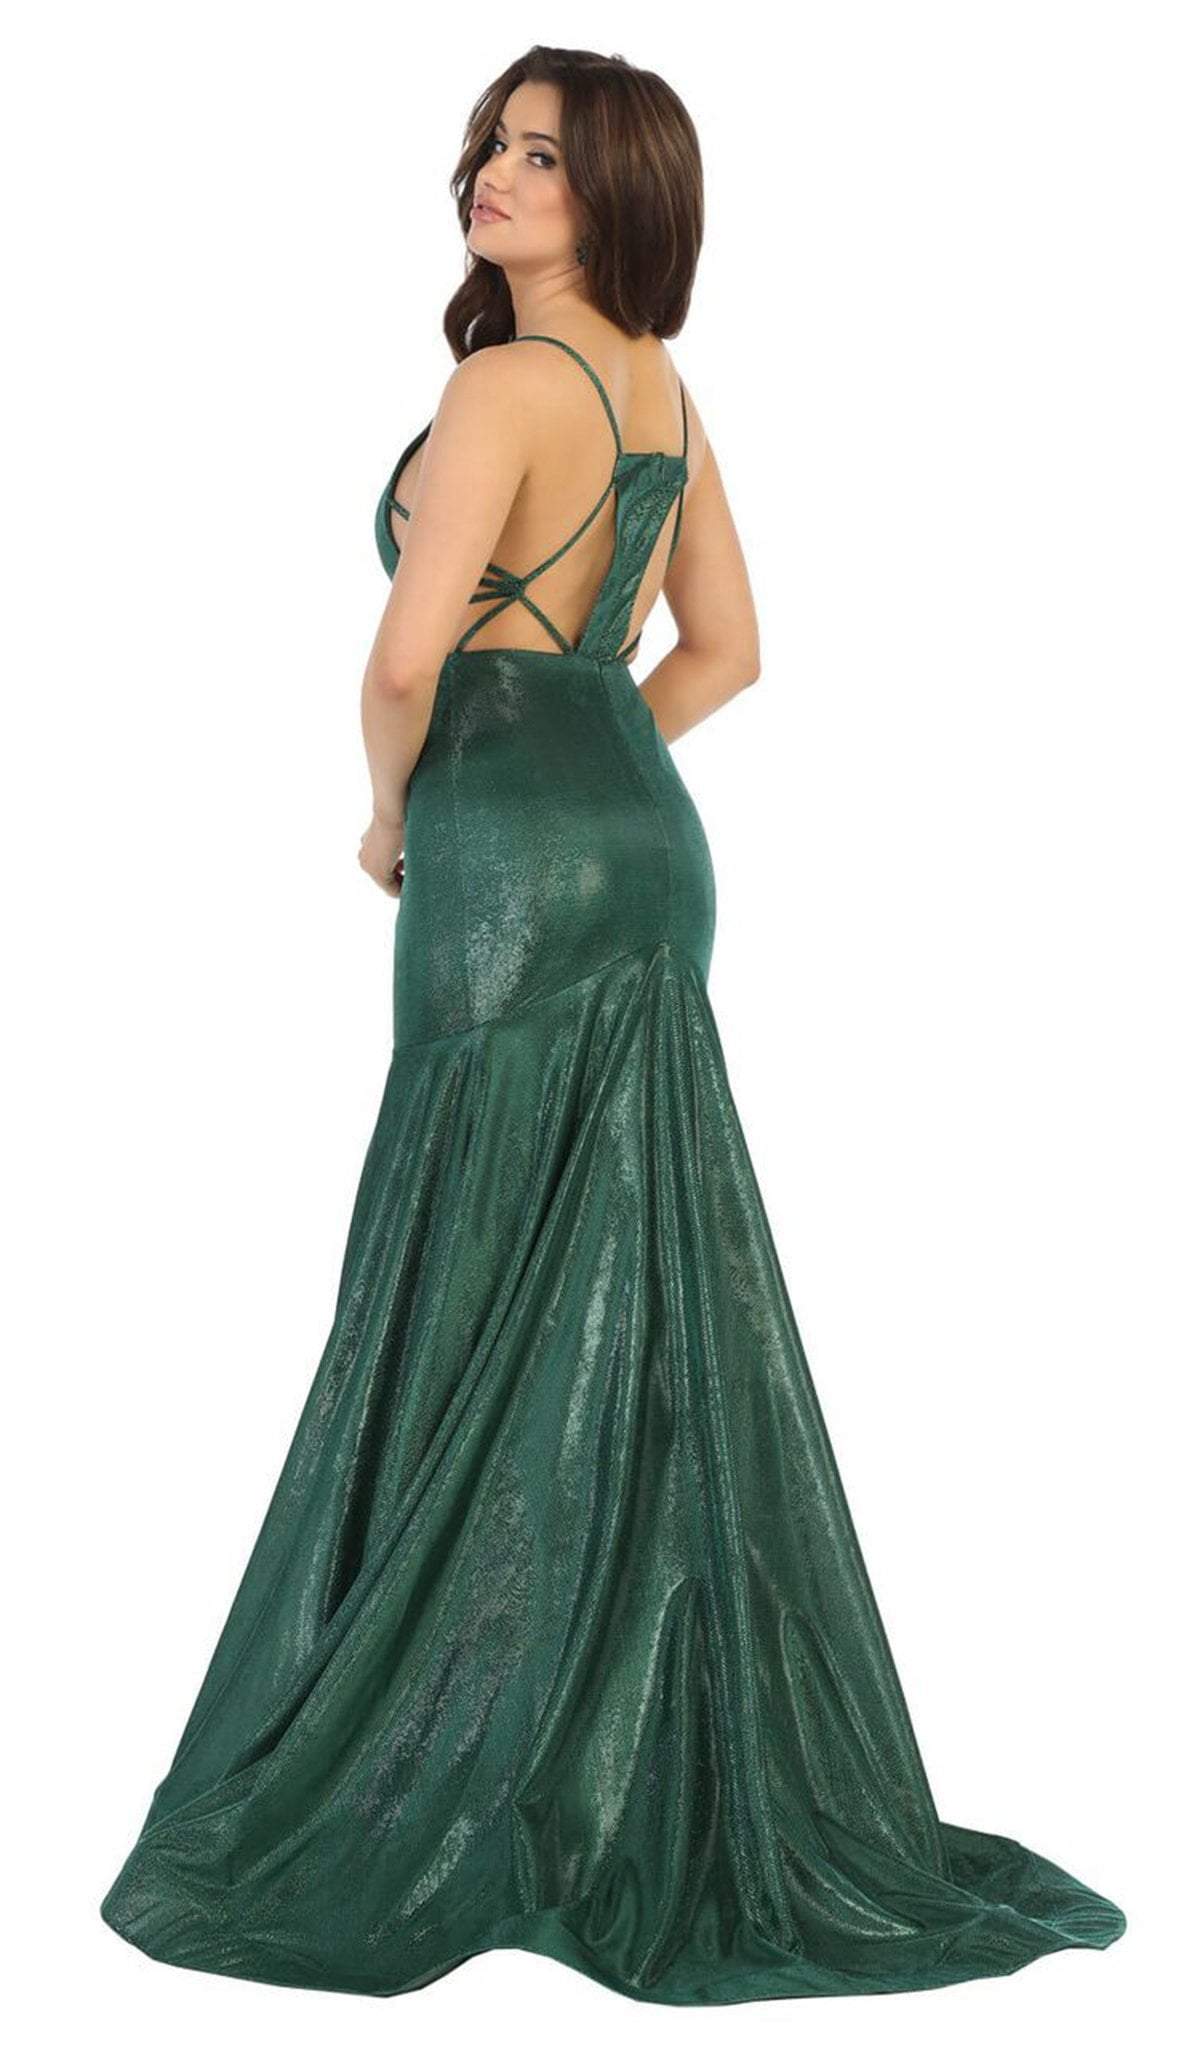 May Queen - RQ7739 Strappy Plunging V-Neck Trumpet Dress In Green